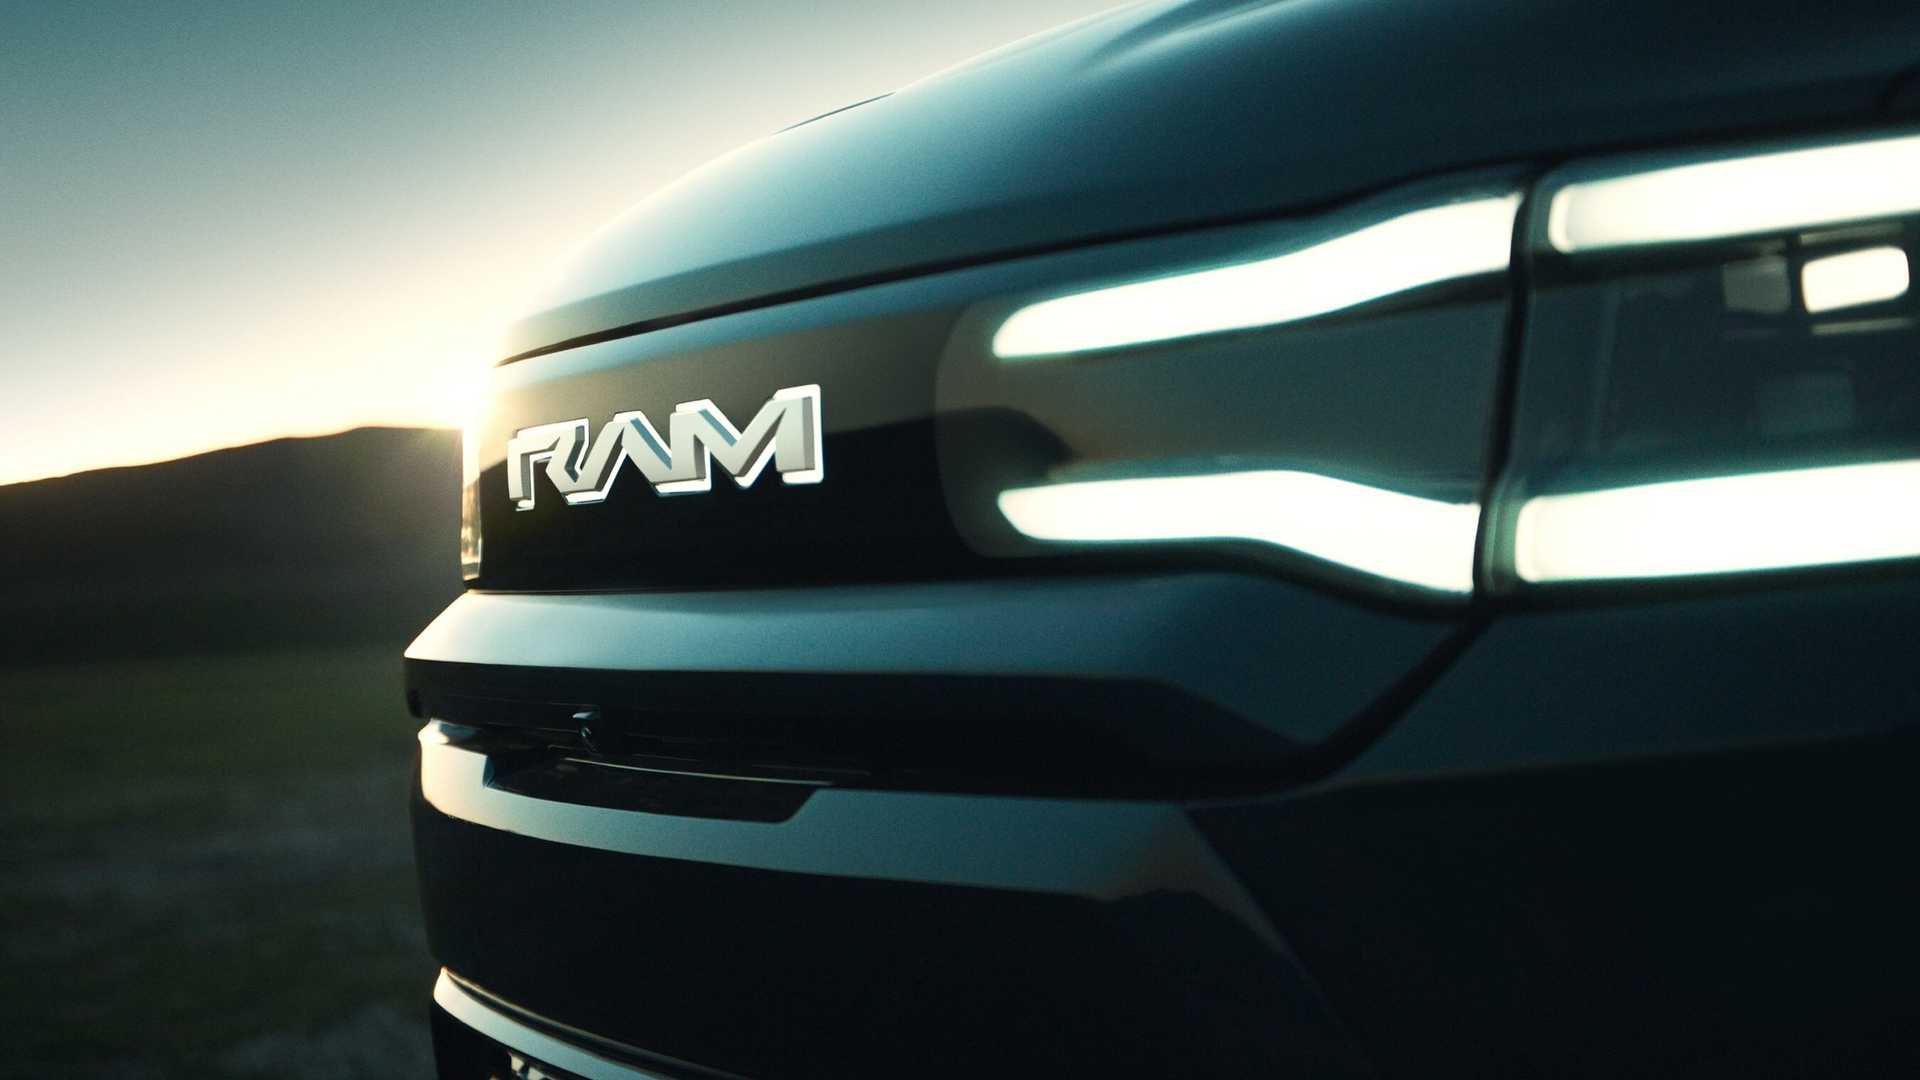 Ram launches teaser of its next electric truck: 1500 Rev